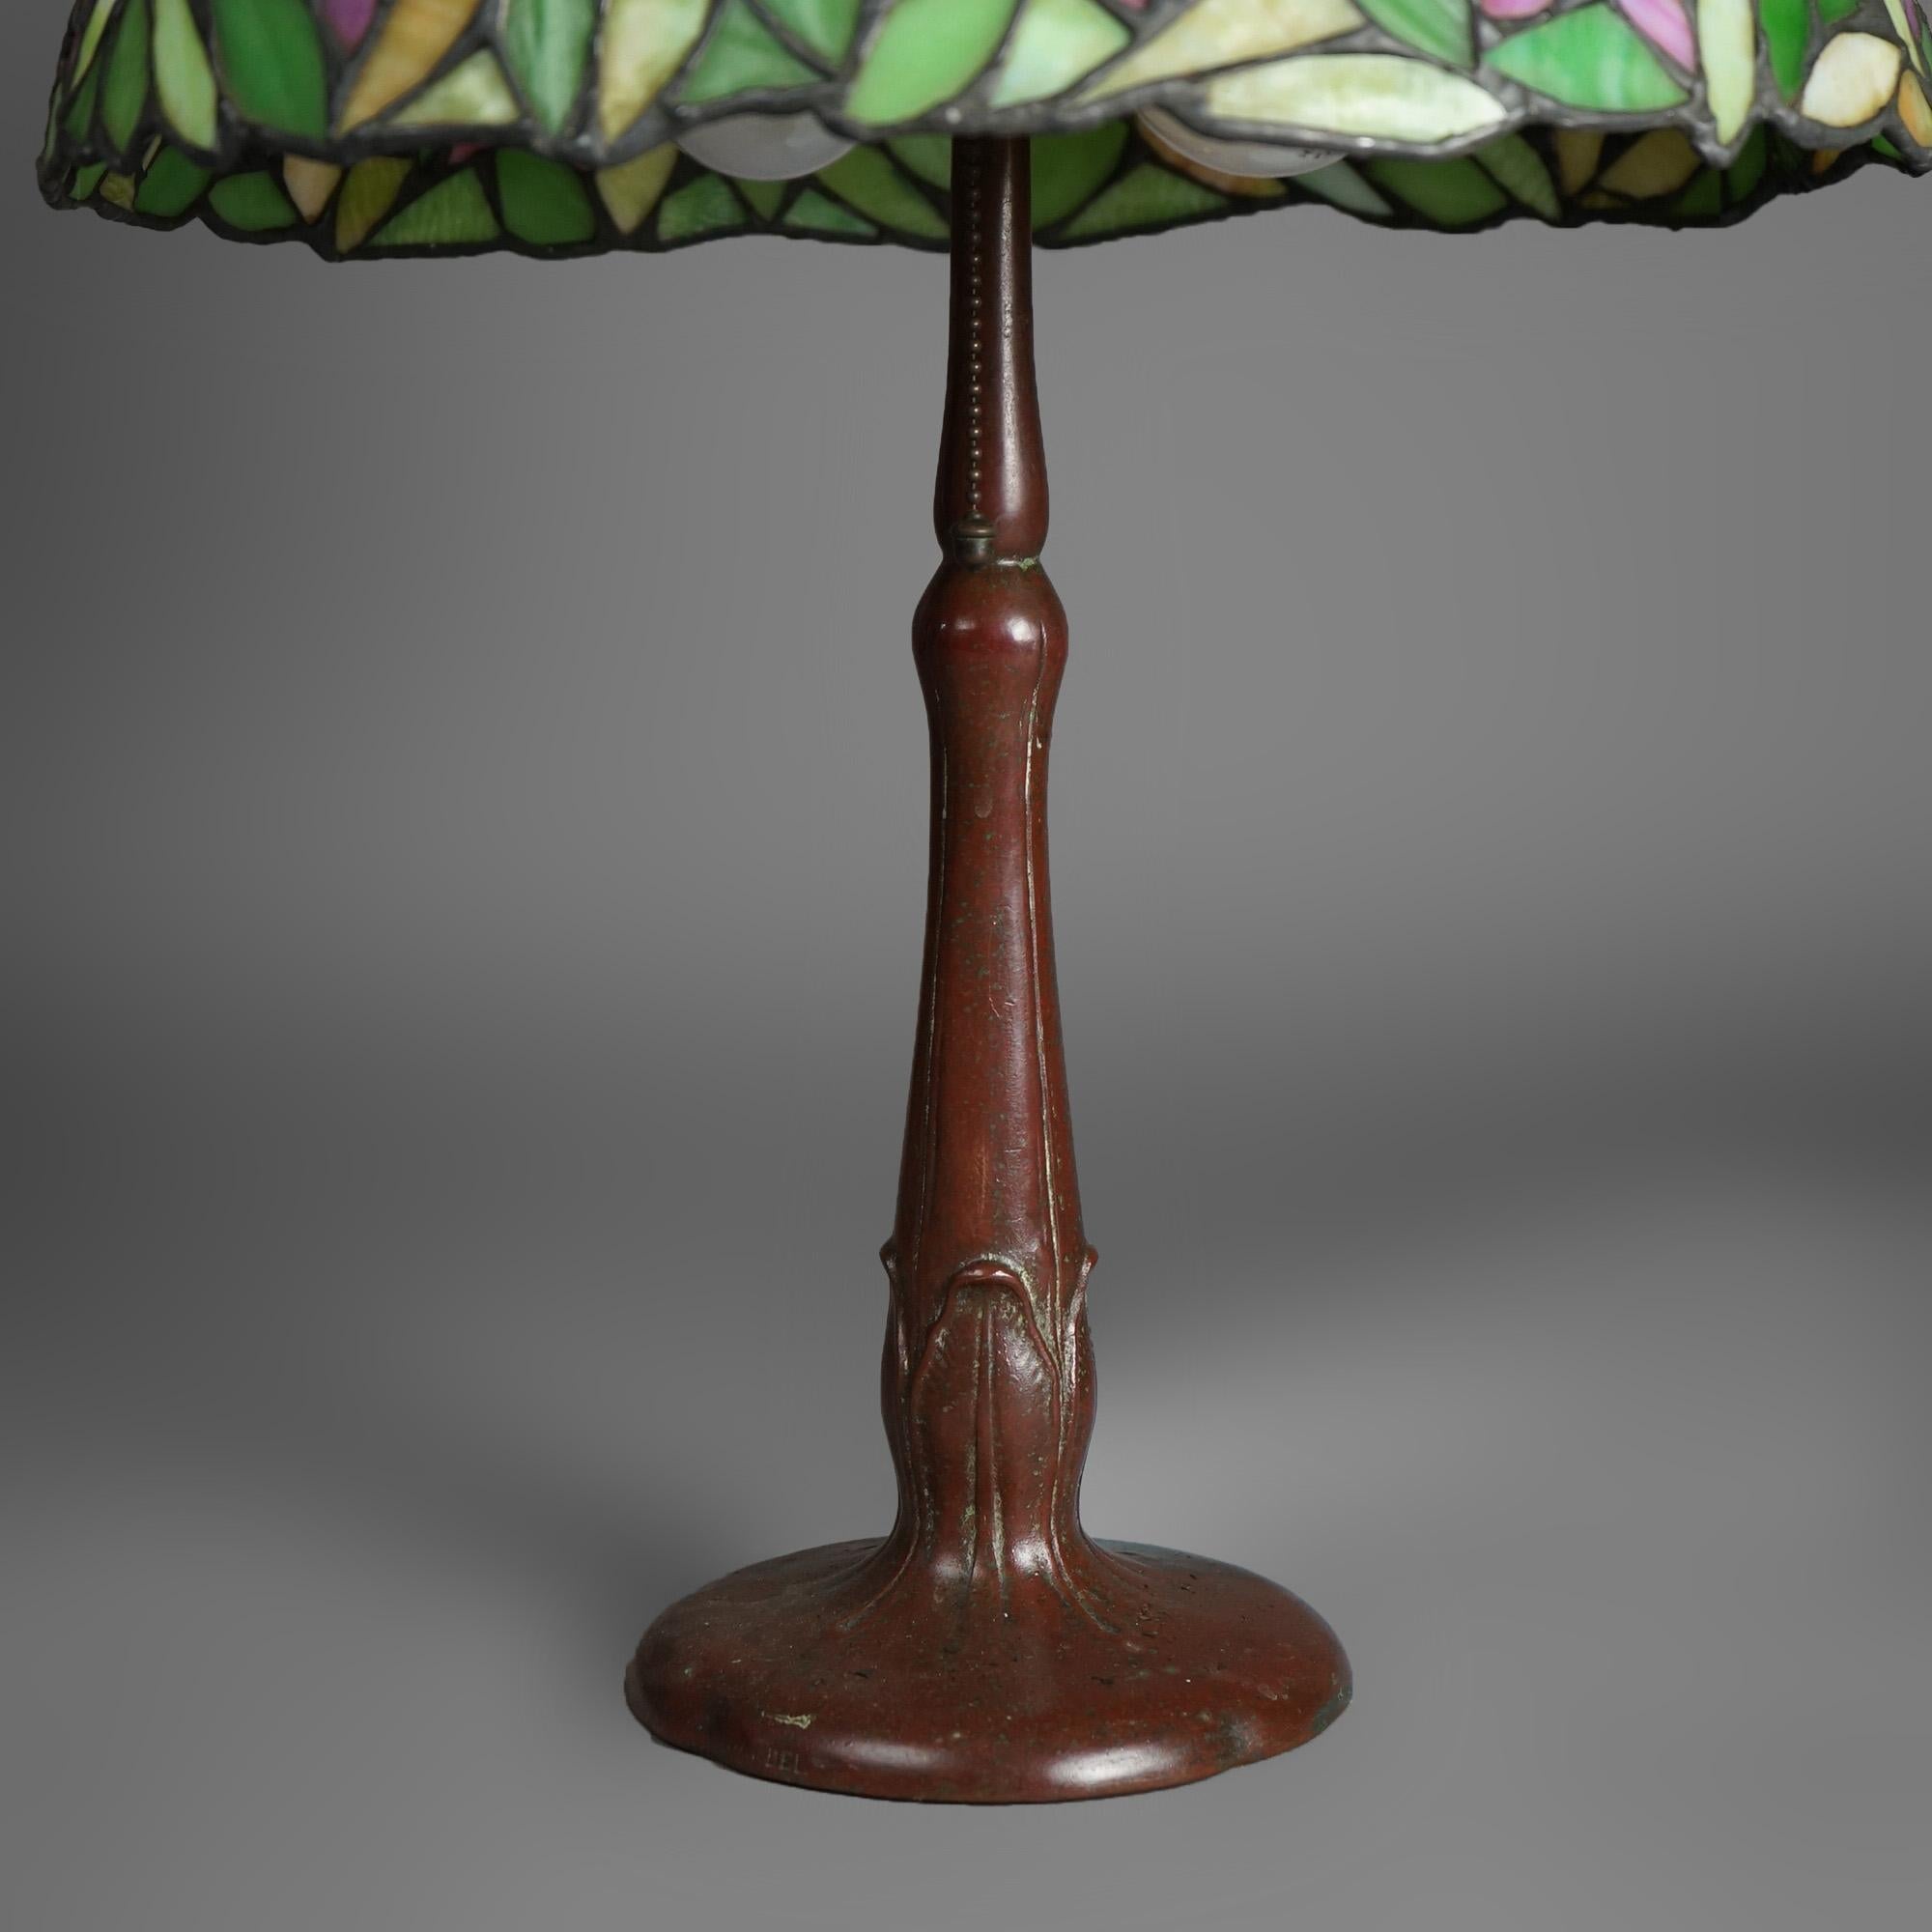 Antique Arts & Crafts Leaded Glass Lamp With Unique Shade & Handel Base c1920 2